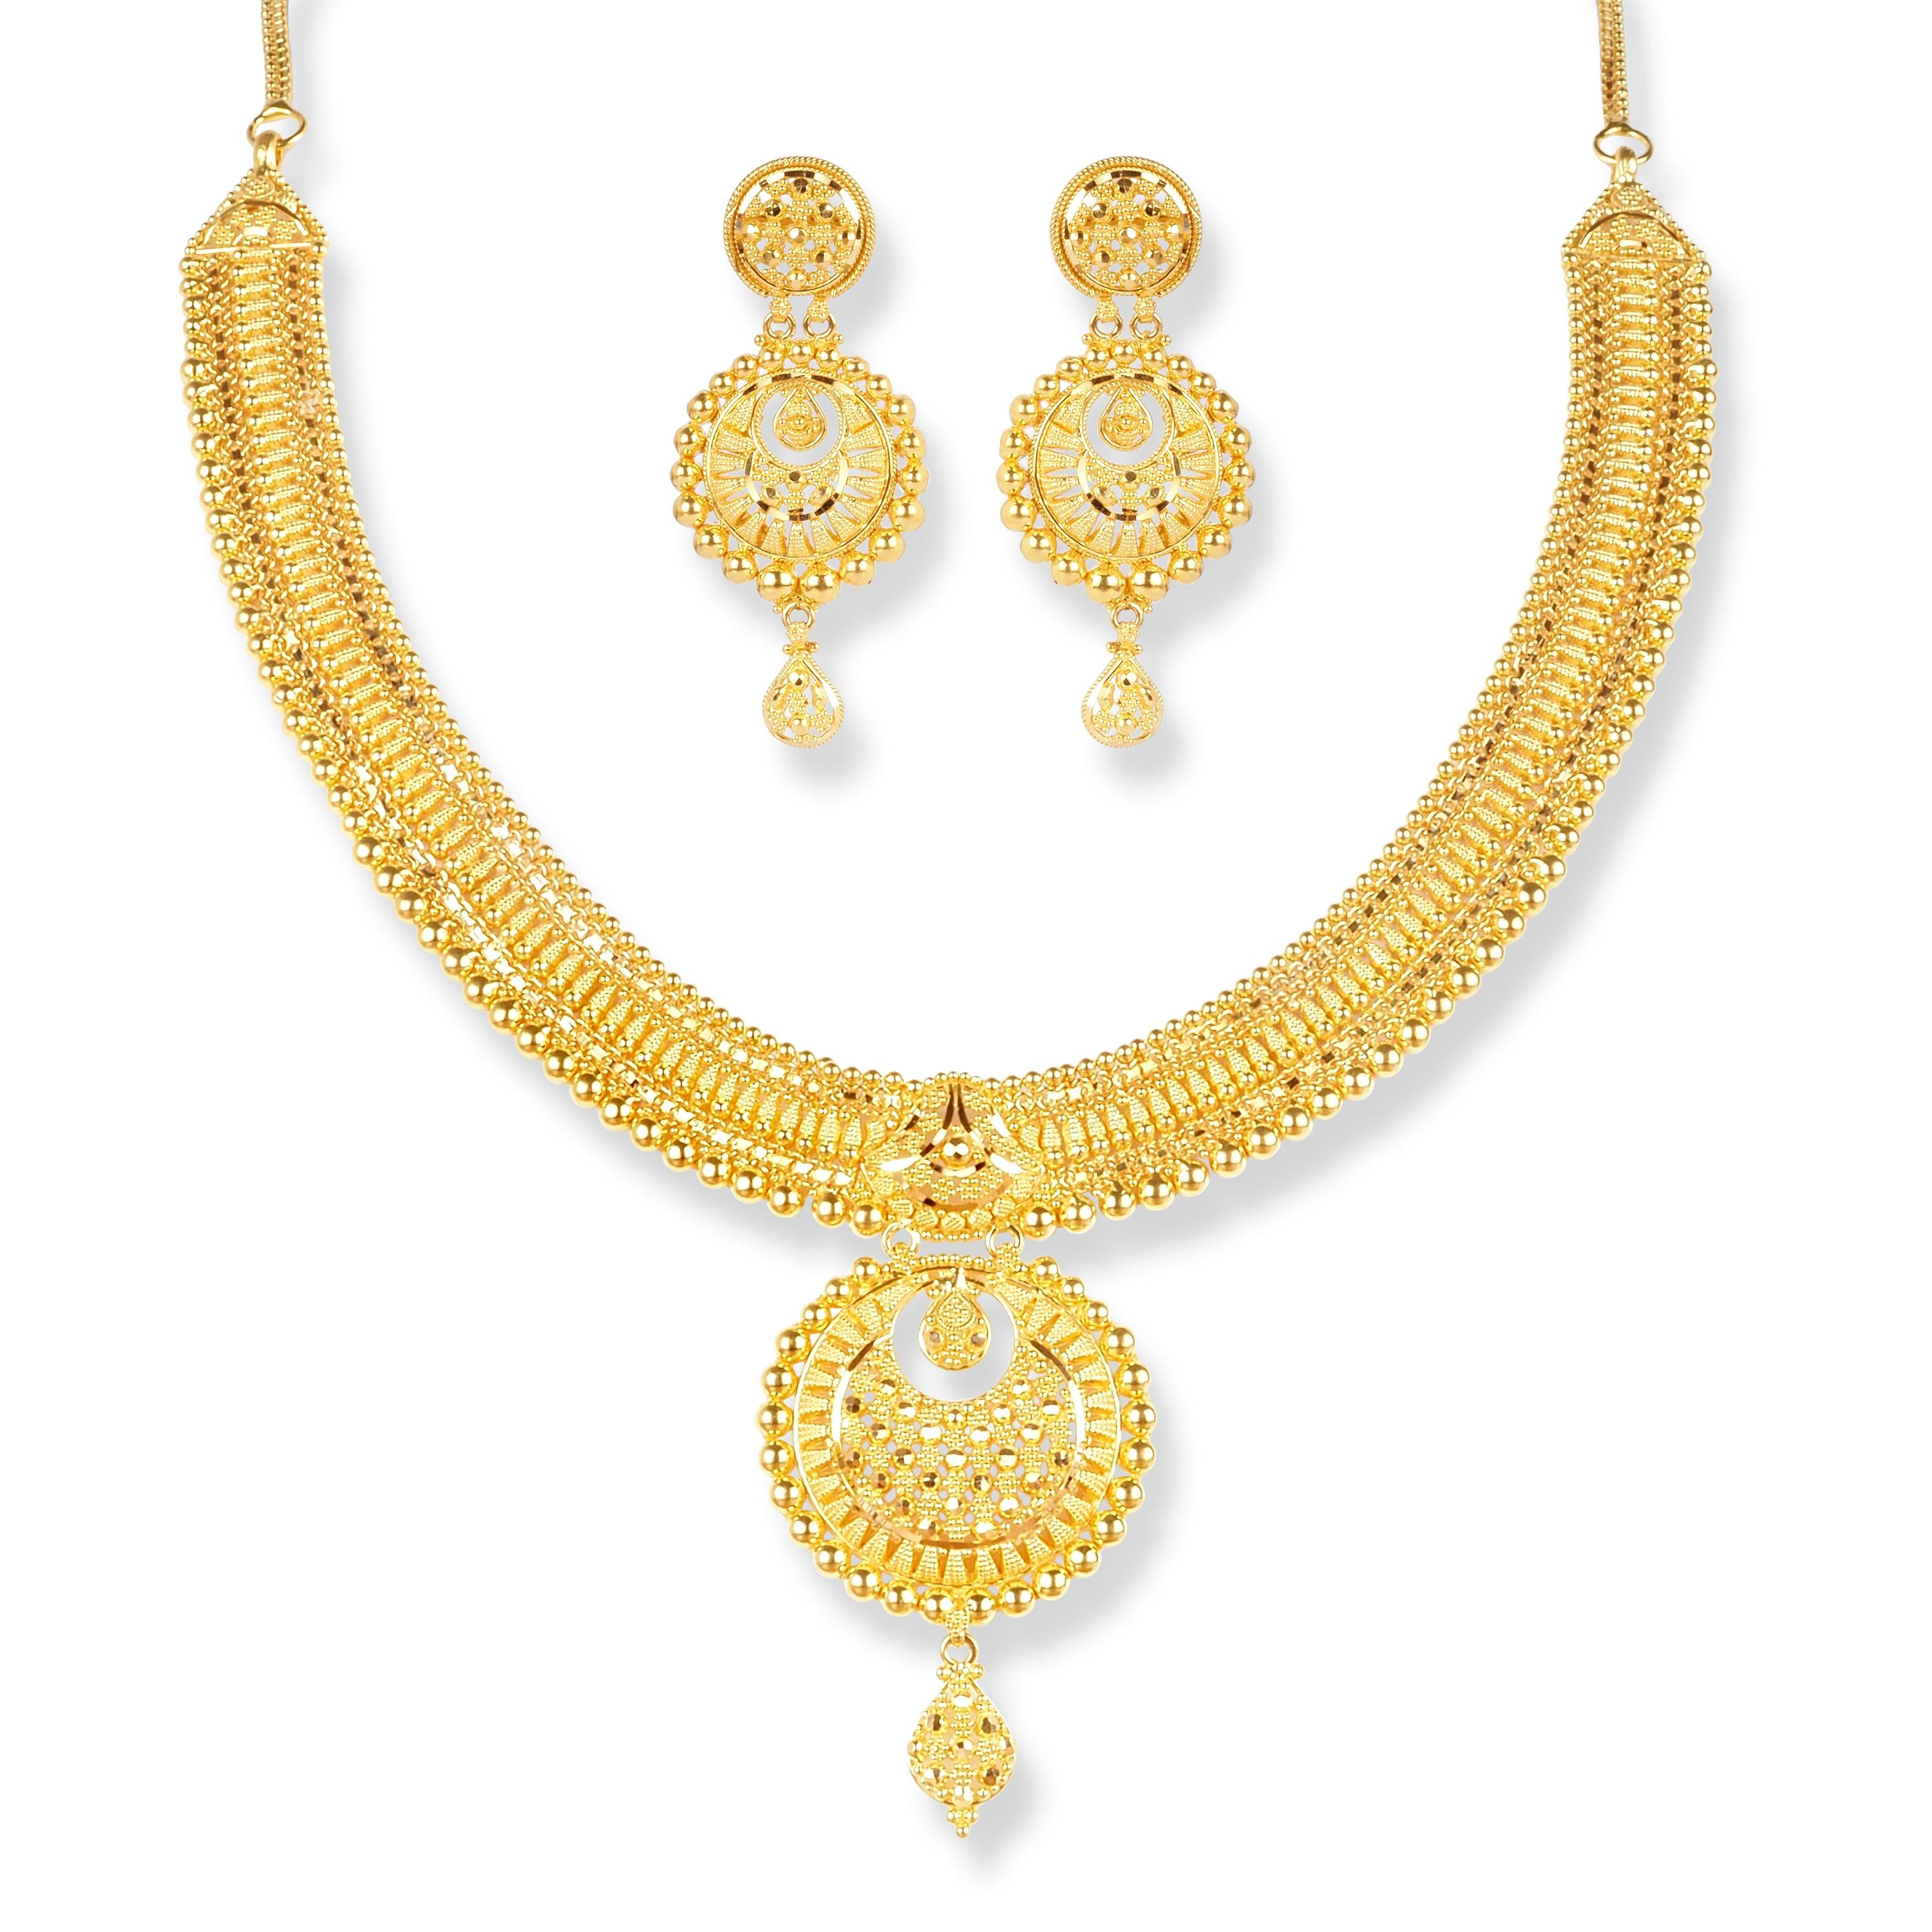 22ct Gold Set with Filigree Work (Necklace + Drop Earrings) N-8169 E-8169 - Minar Jewellers